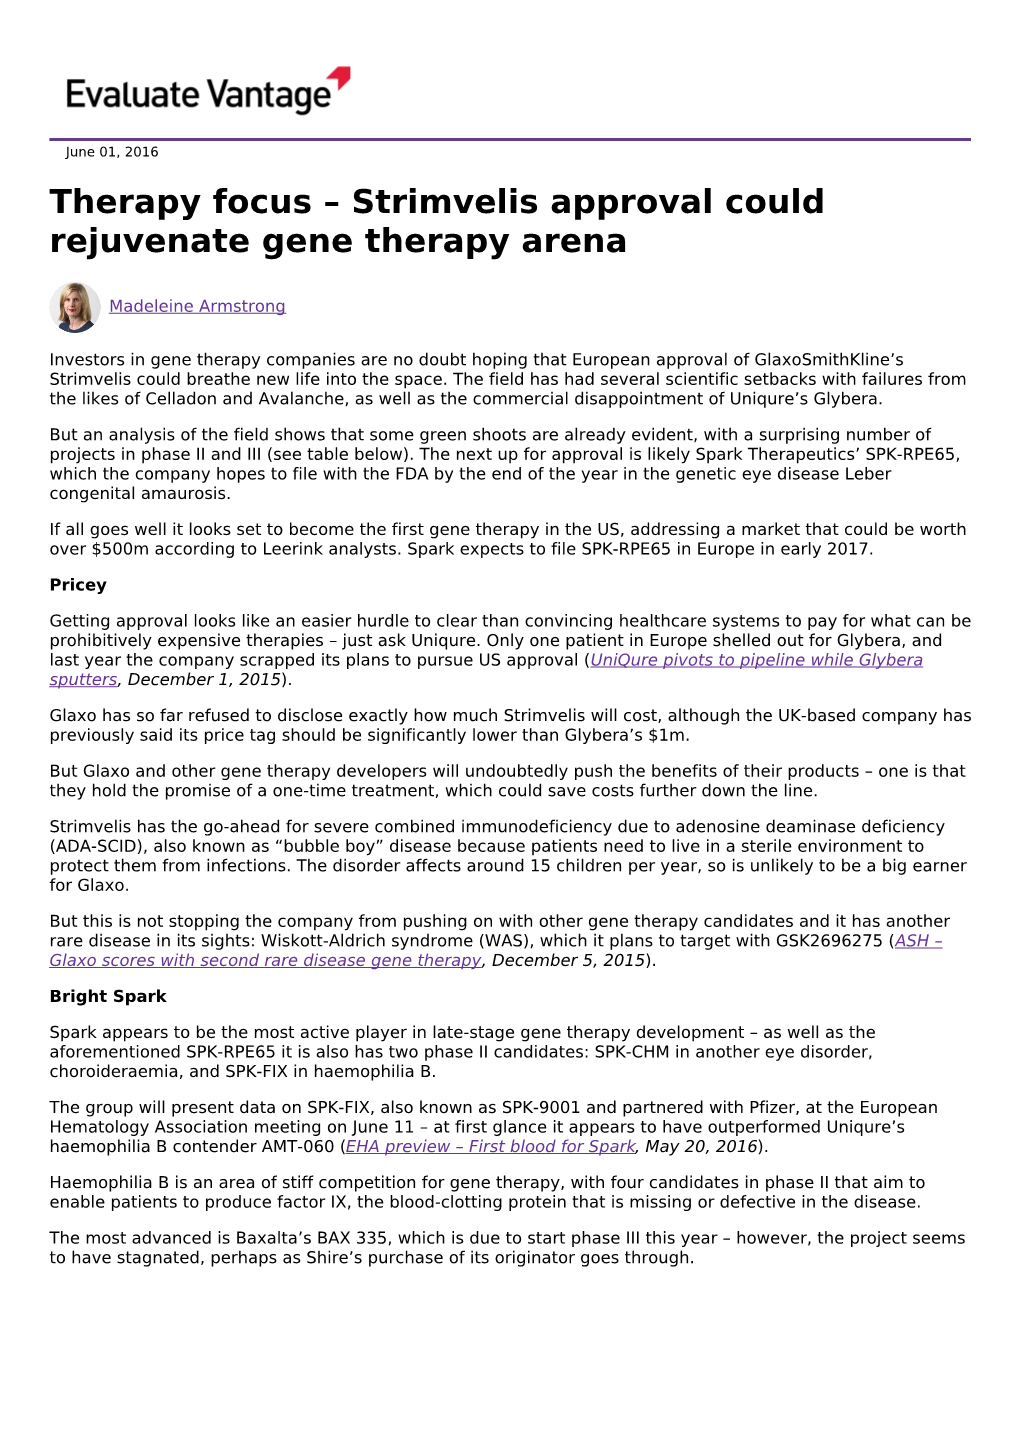 Therapy Focus – Strimvelis Approval Could Rejuvenate Gene Therapy Arena